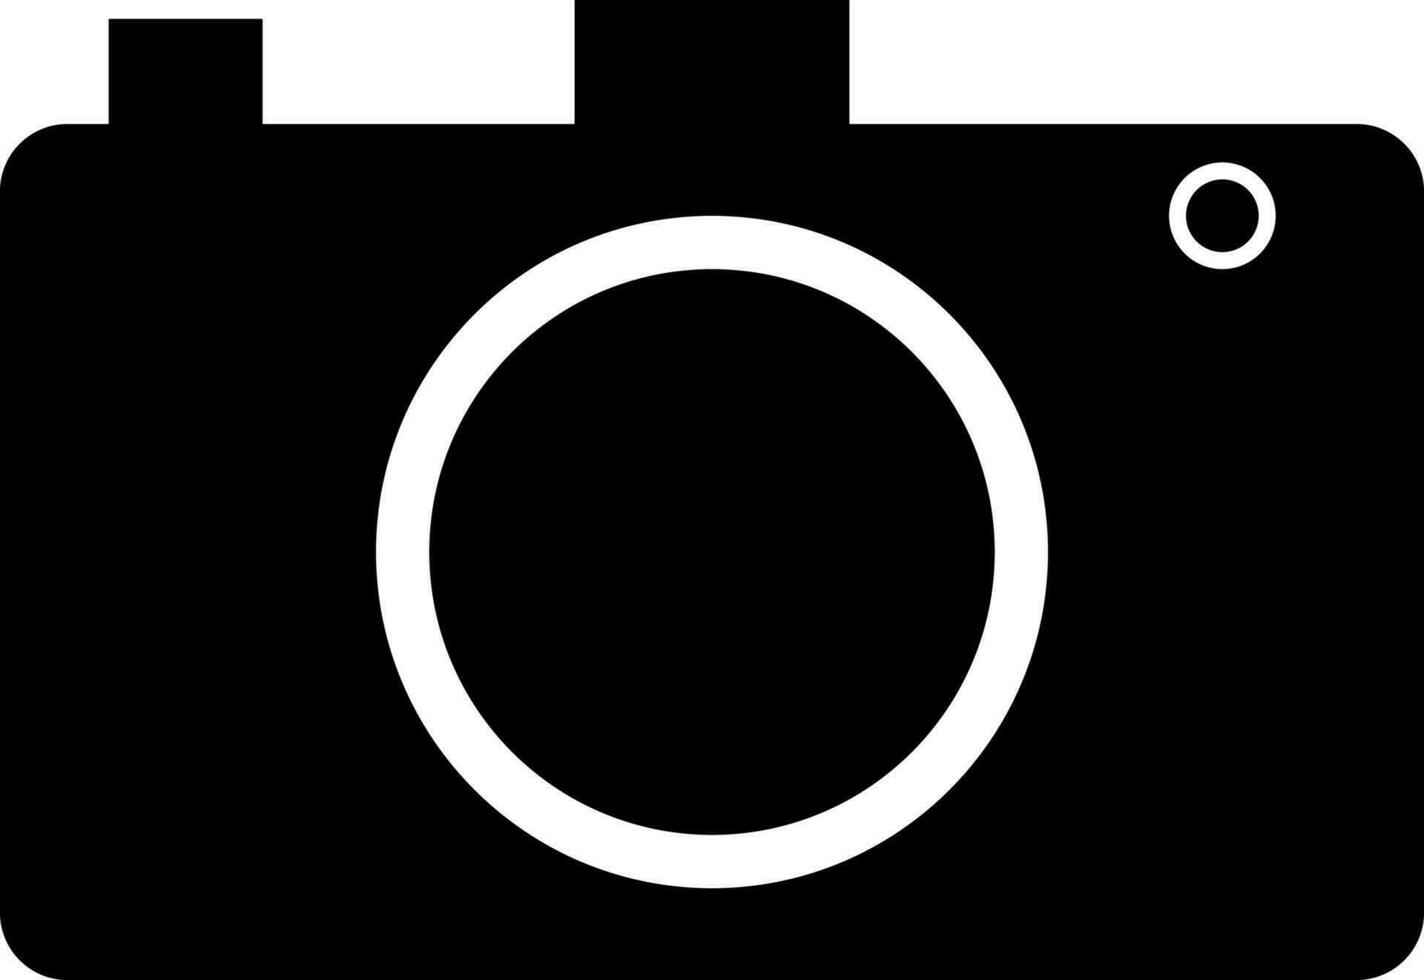 Black and White camera icon in flat style. vector